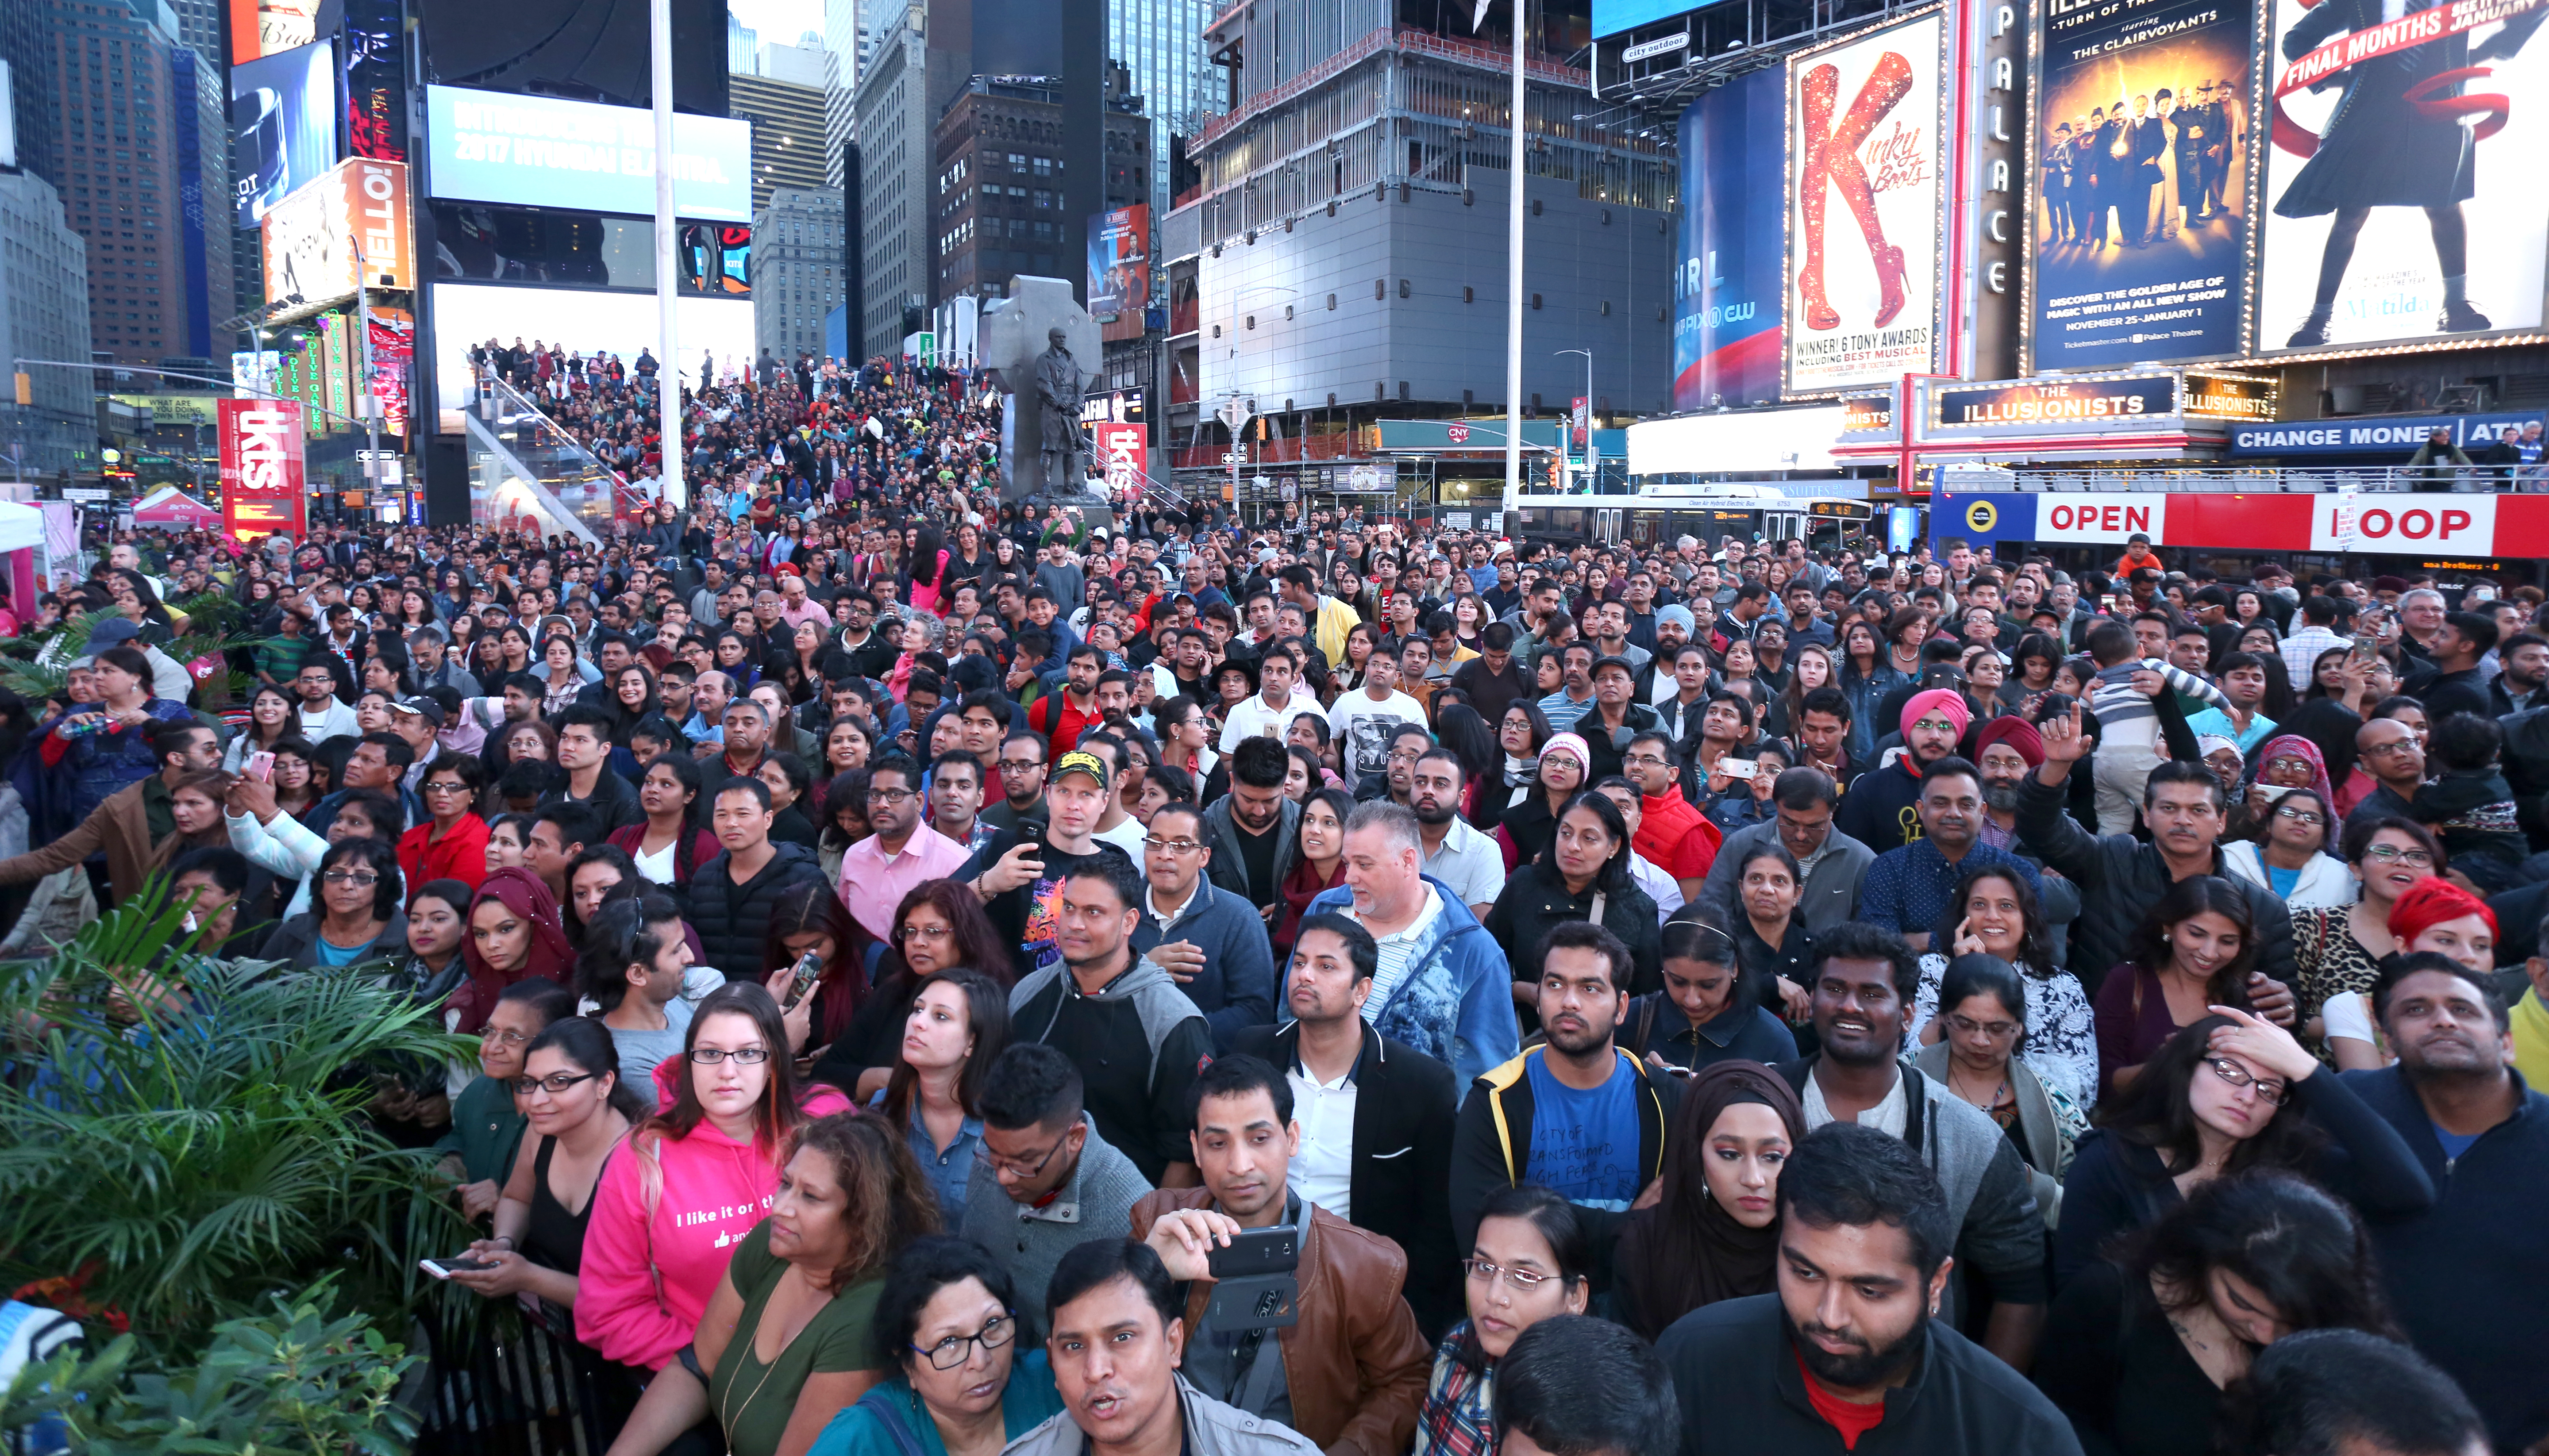 Thousands gathered to experience excitement and joy of Diwali at Times Square